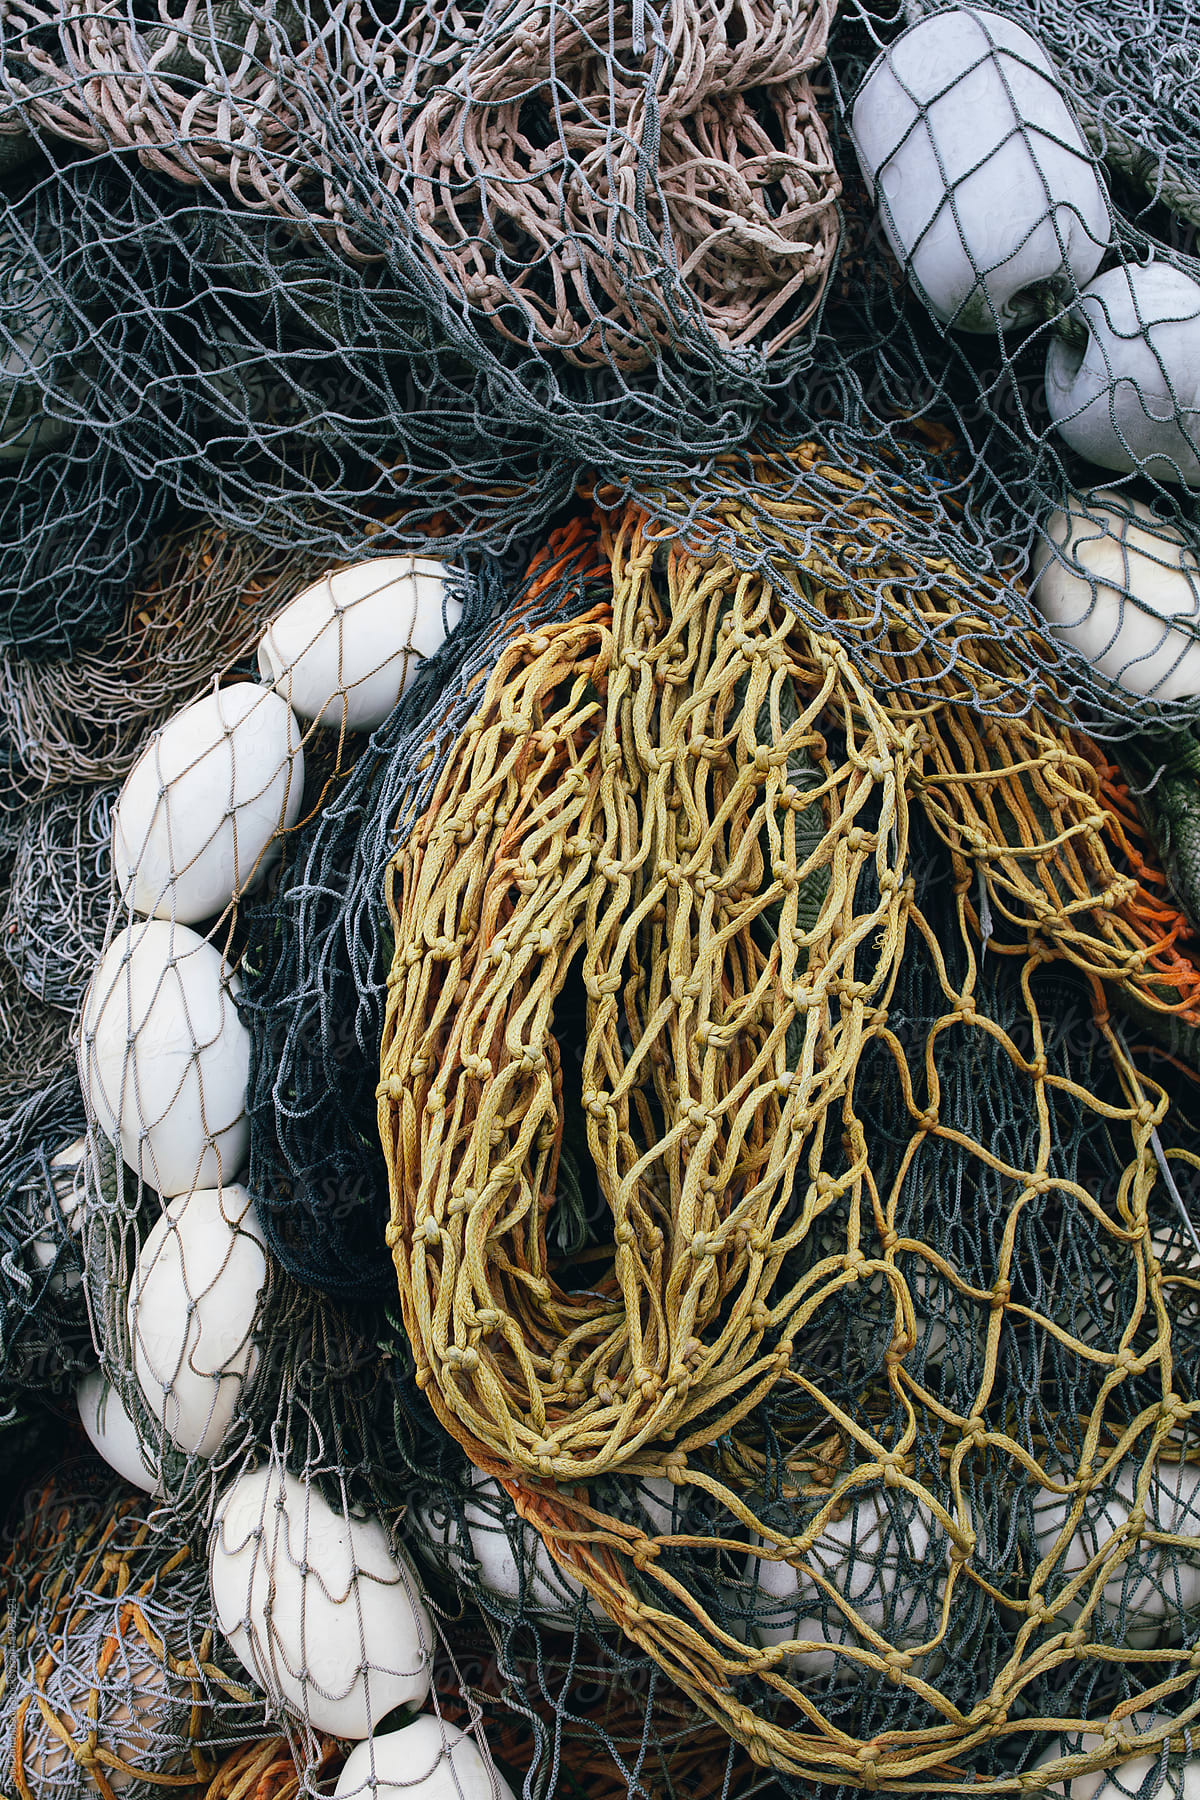 Detail Of Commercial Fishing Nets, Ropes And Equipment by Stocksy  Contributor Rialto Images - Stocksy